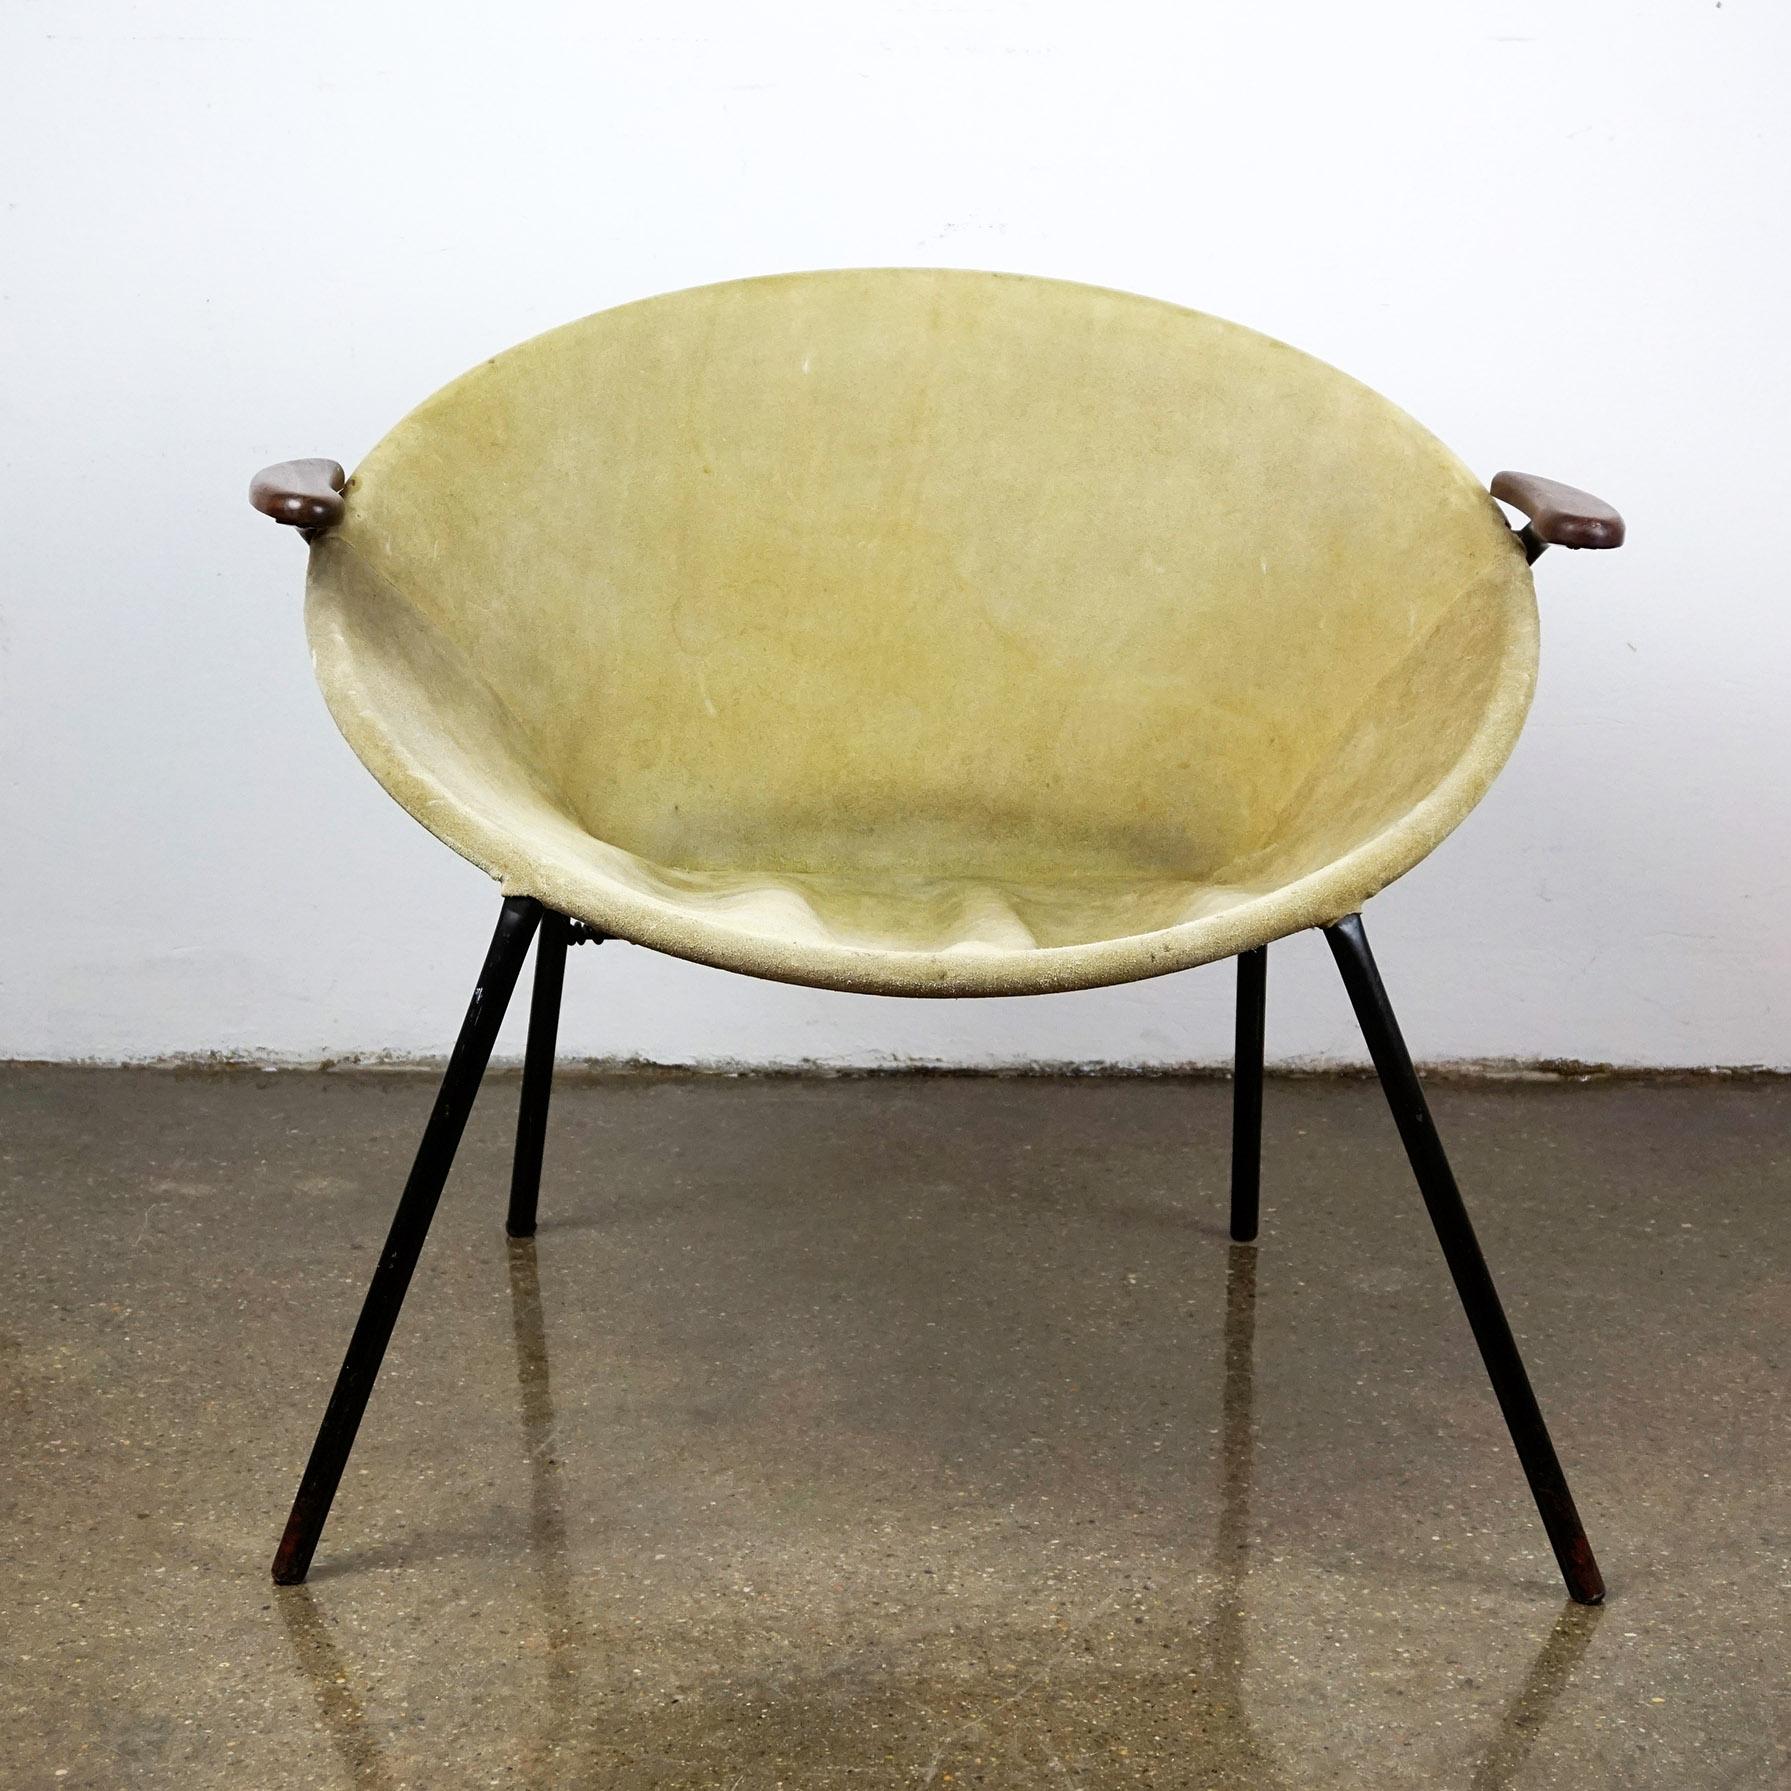 Great Minimalistic design by Hans Olsen. This lounge chair features a solid metal frame with suede leather seat and two solid wooden armrests. All unrestored original vintage condition. Leather without damages, but patina of usage, metal frame with